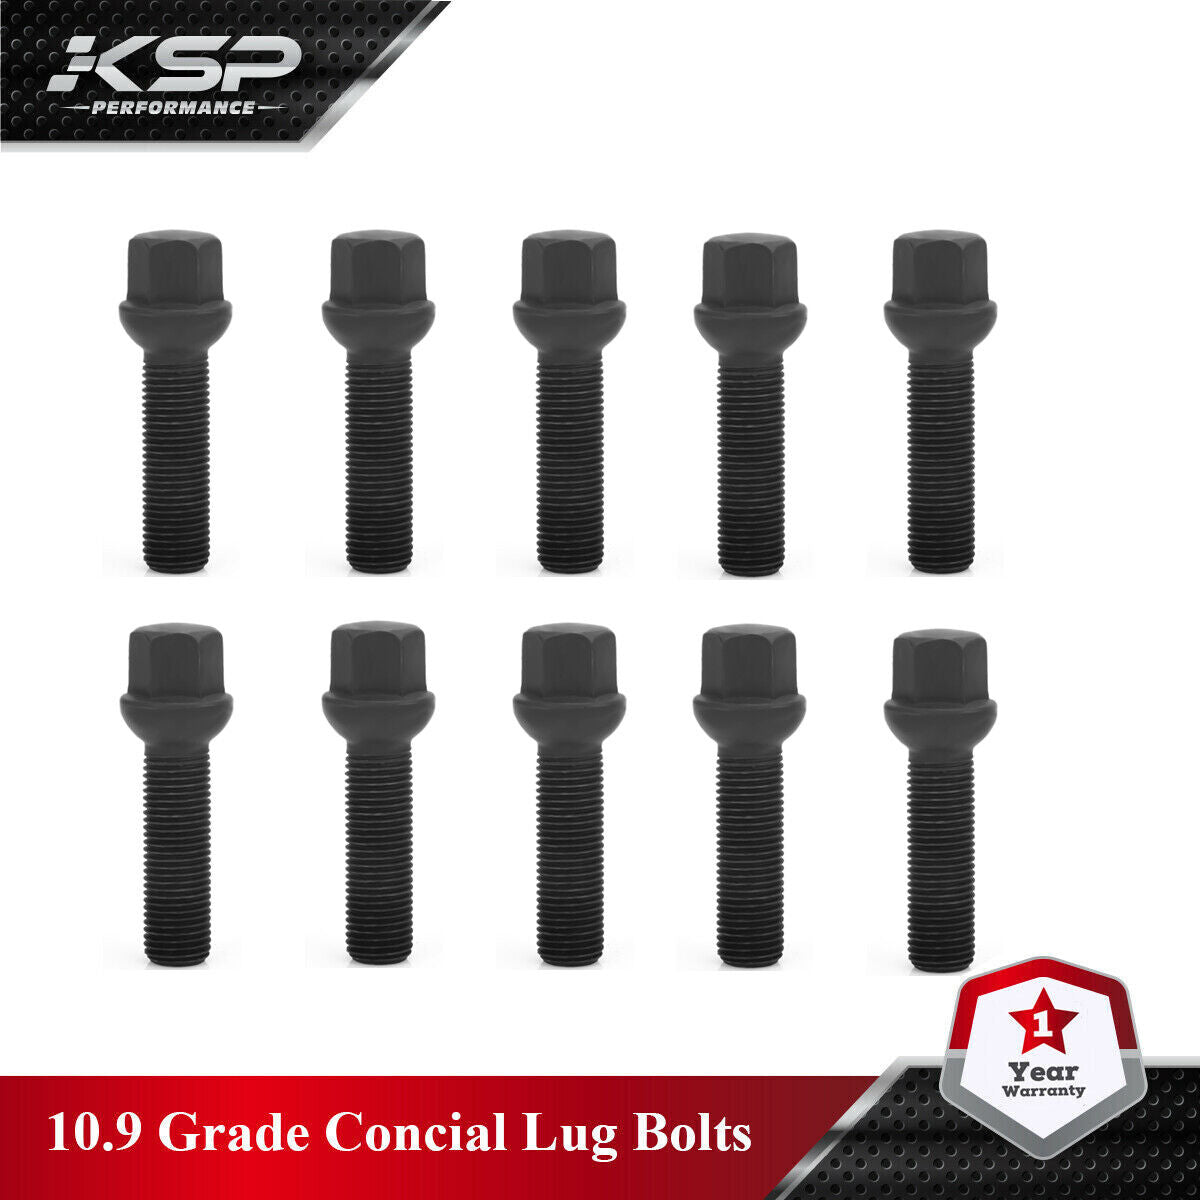 20pcs Ball Seat 14x1.5 Aftermarket Lug Bolts For Audi VolksWagen Mercedes Benz Wheel Spacers